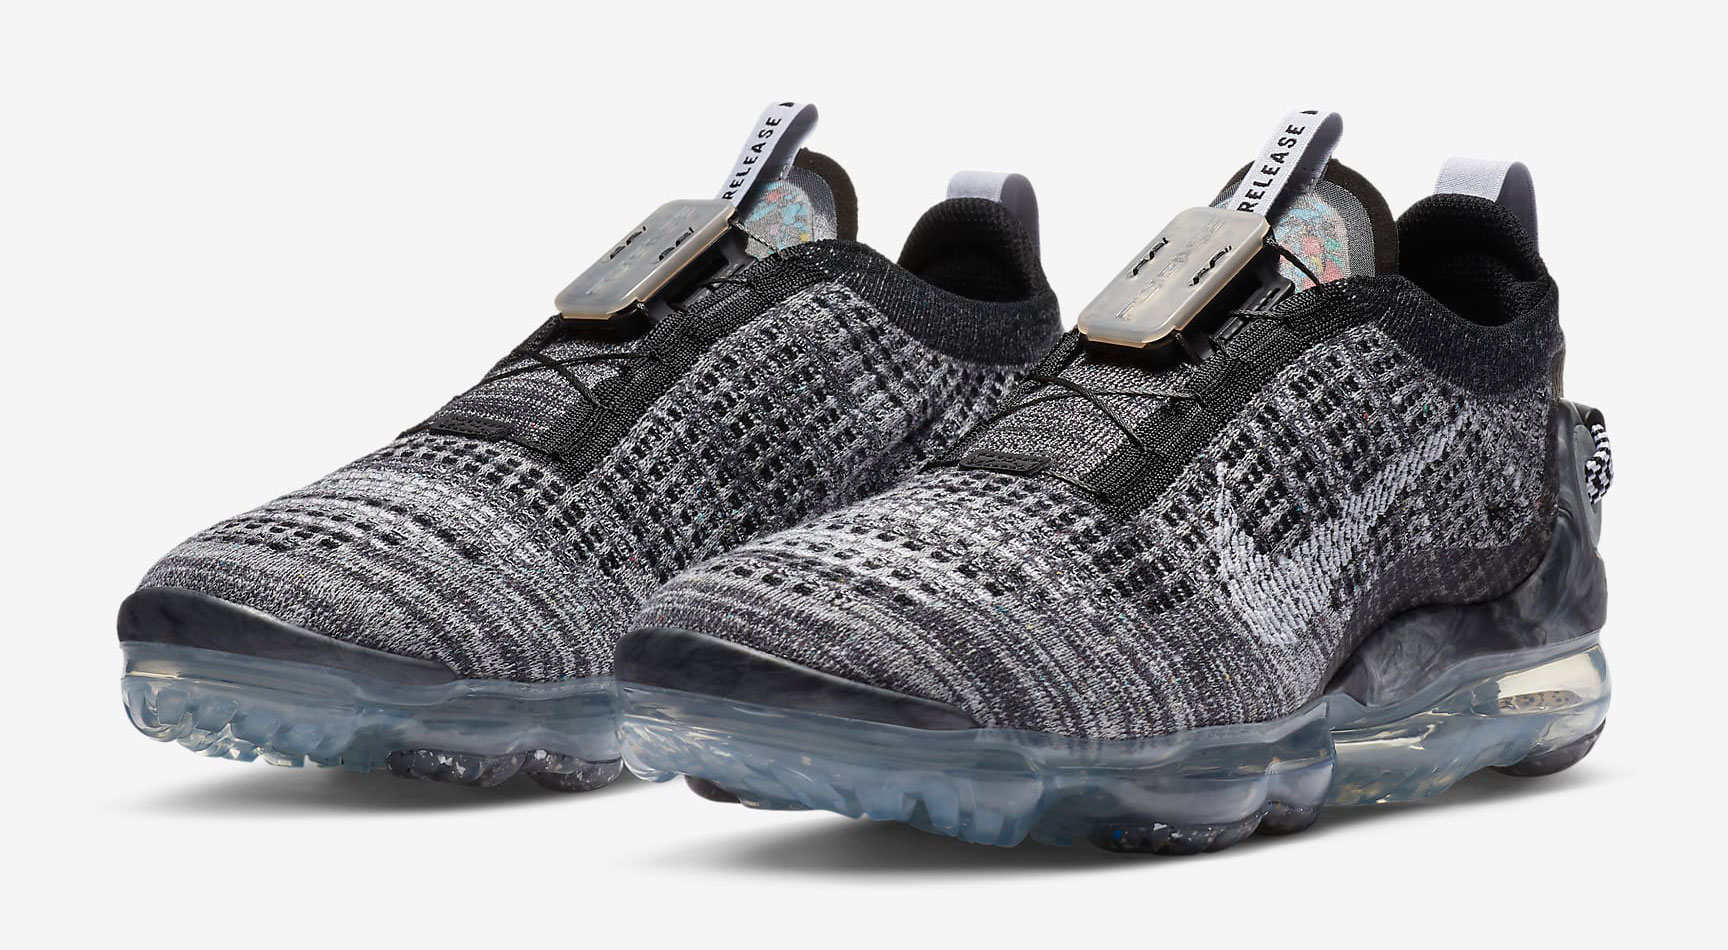 nike dress air vapormax flyknit 2020 oreo release date price 1